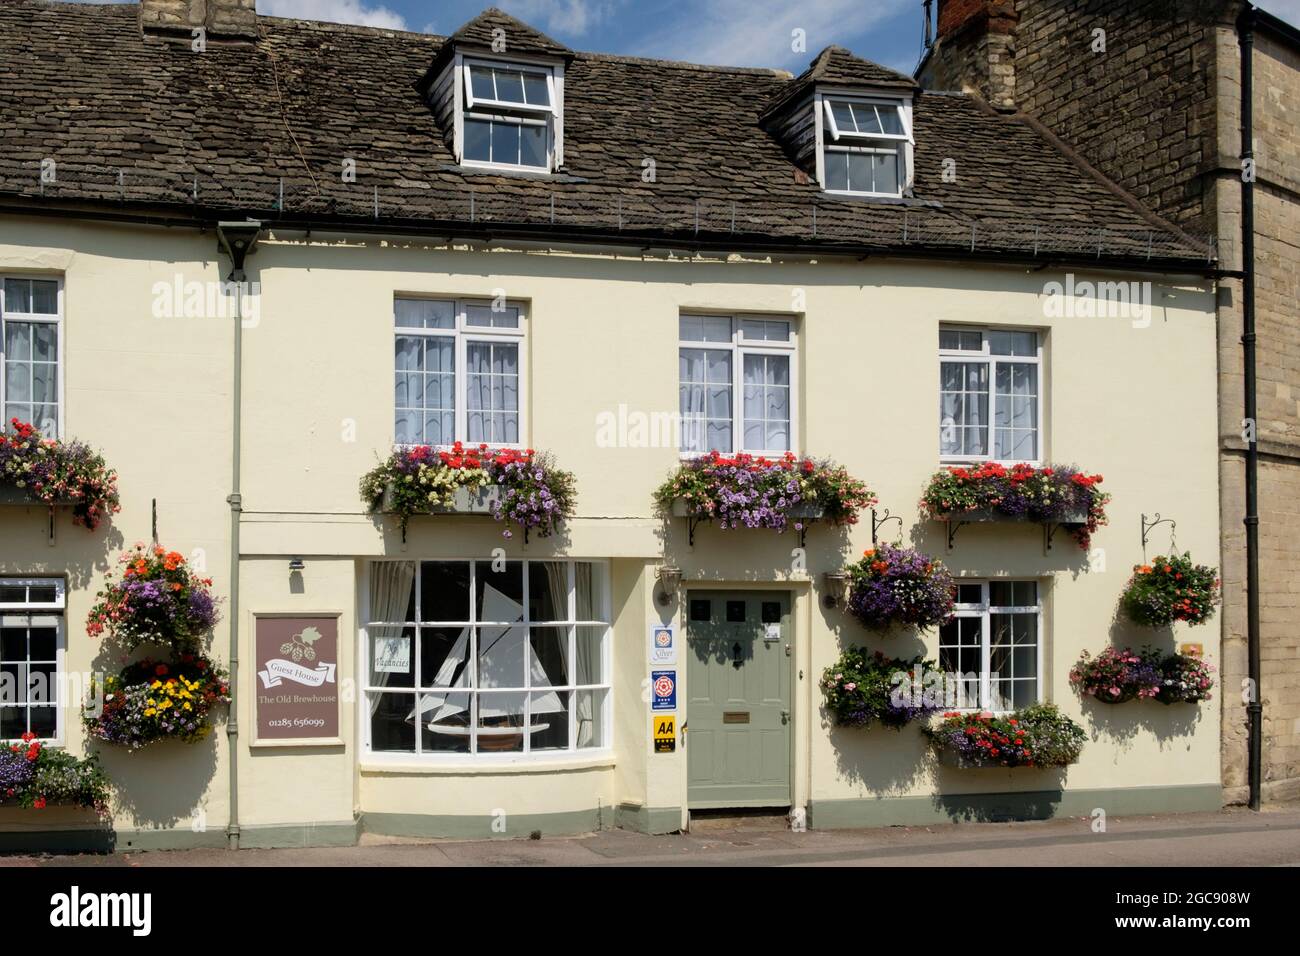 Around Cirencester, a traditional Gloucester market town in the Cotswolds. The Old Brewhouse Guest House. Stock Photo